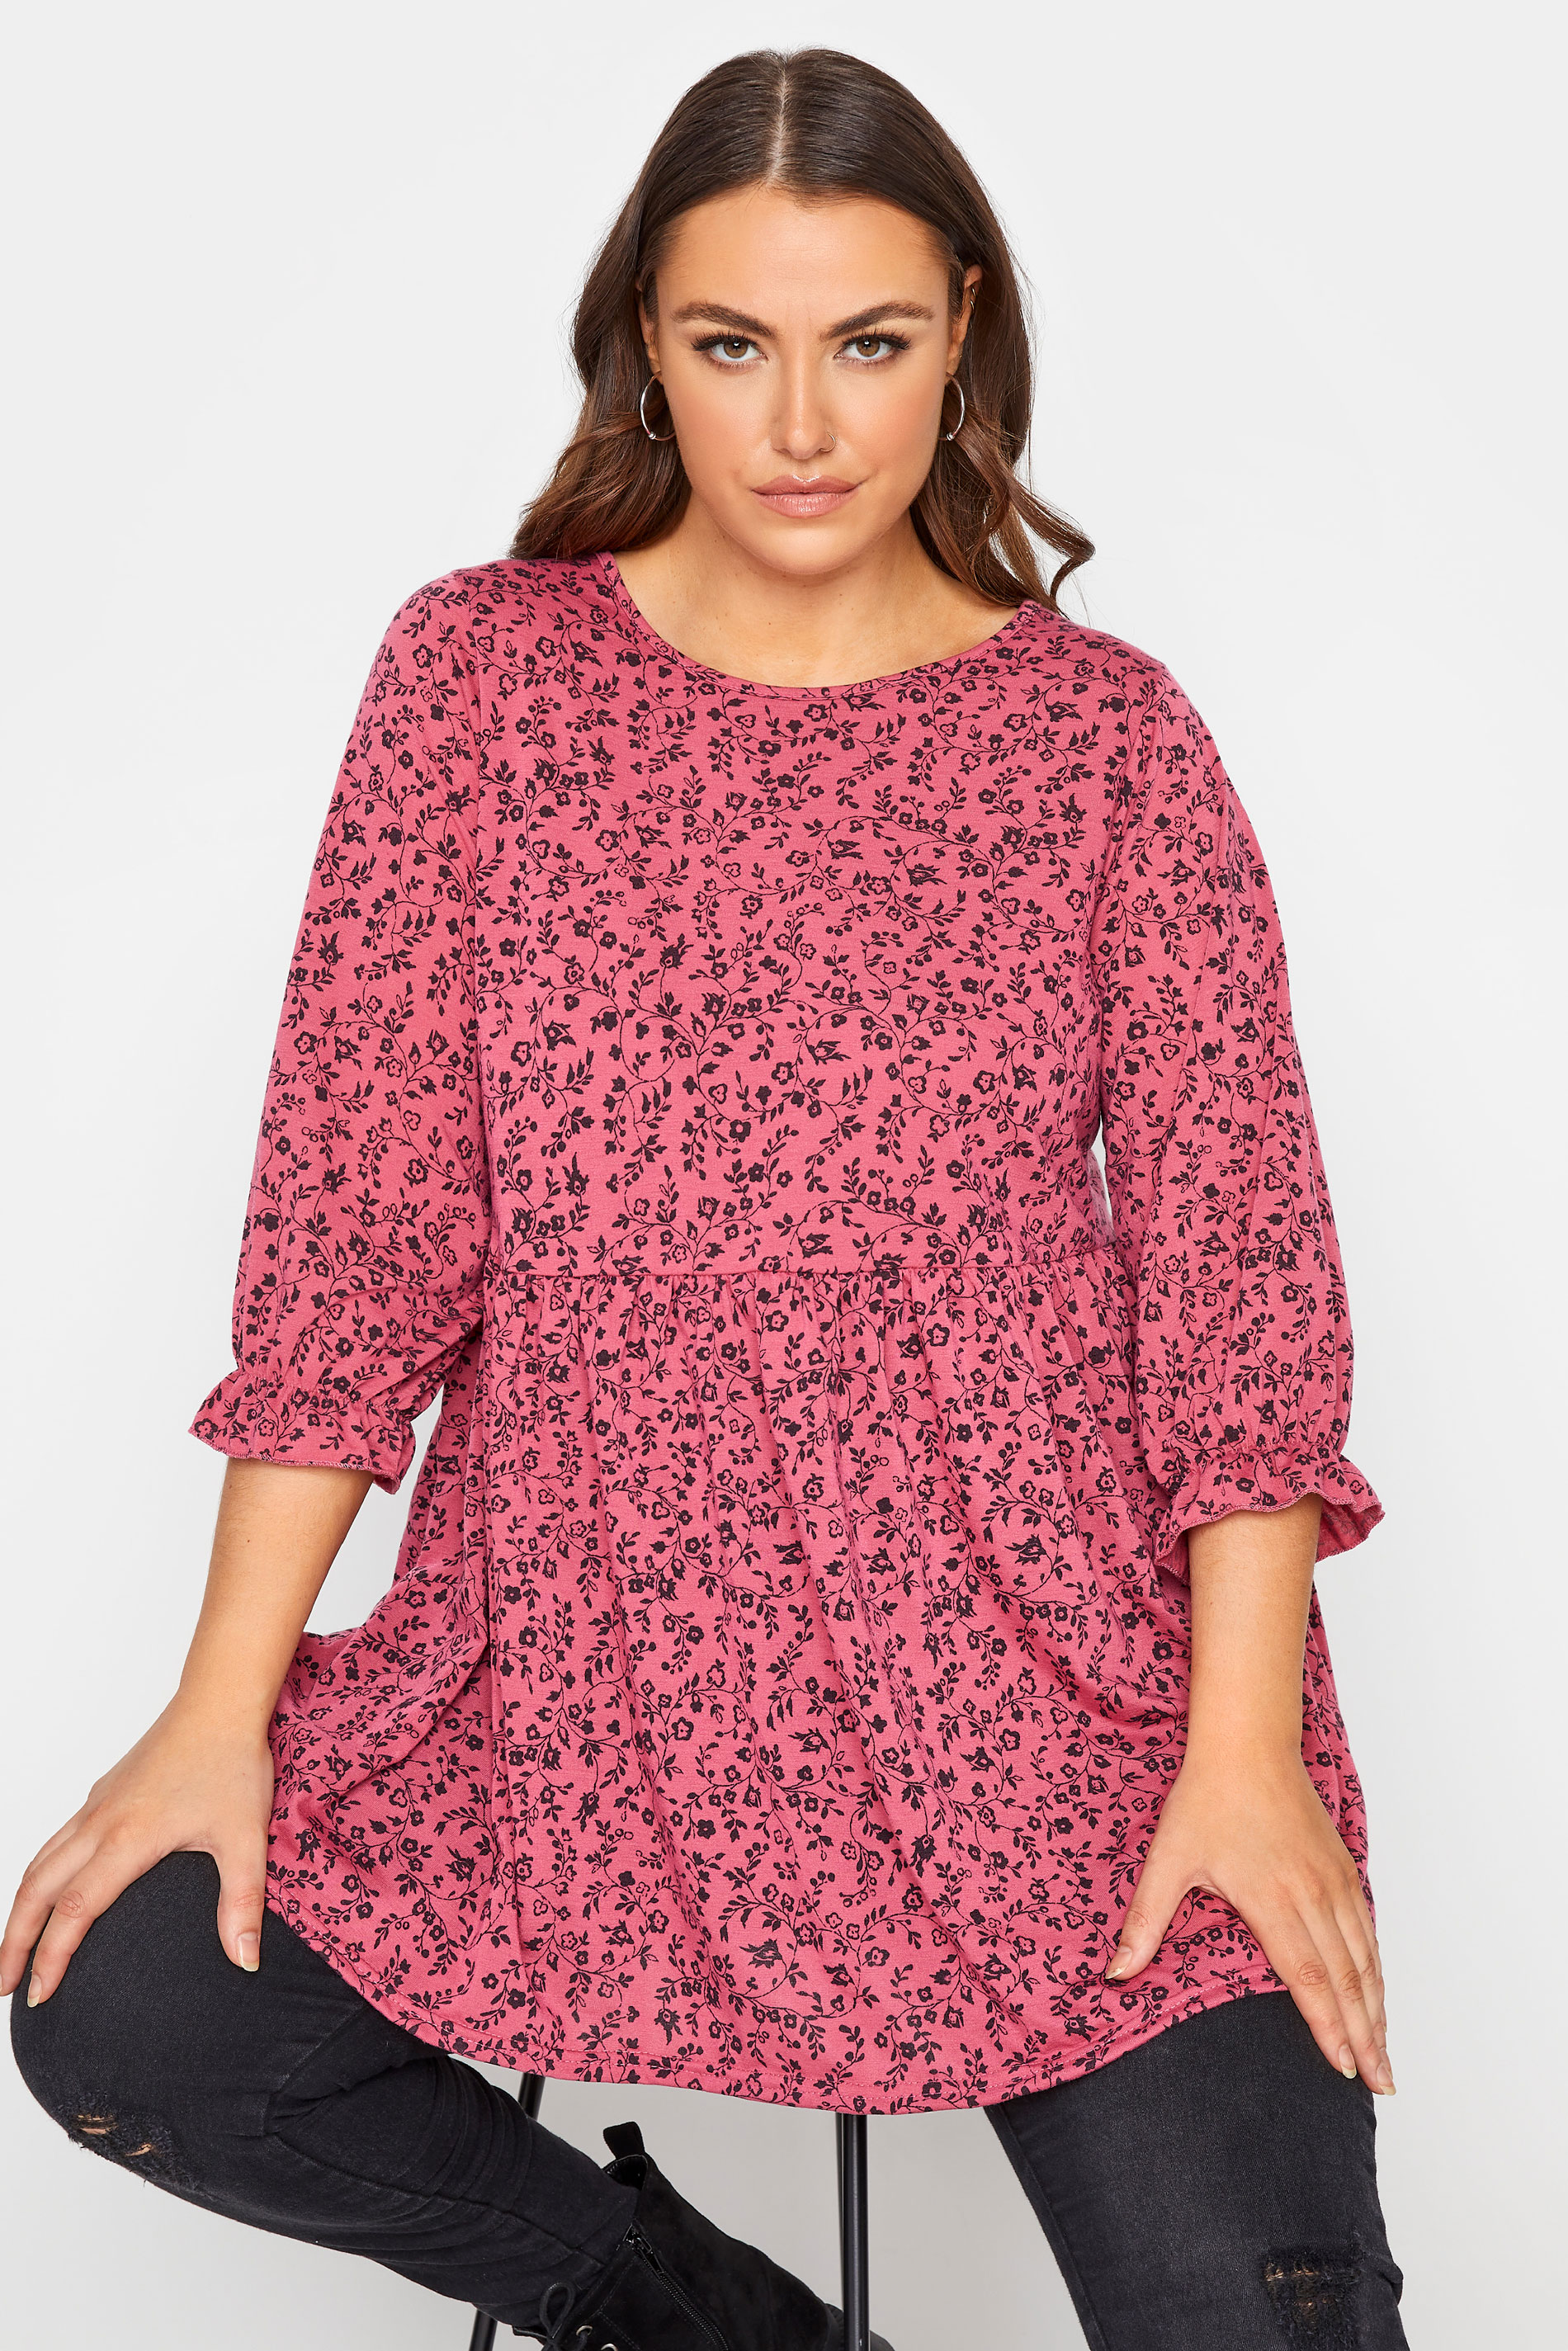 LIMITED COLLECTION Curve Pink Ditsy Print Frill Peplum Top 1